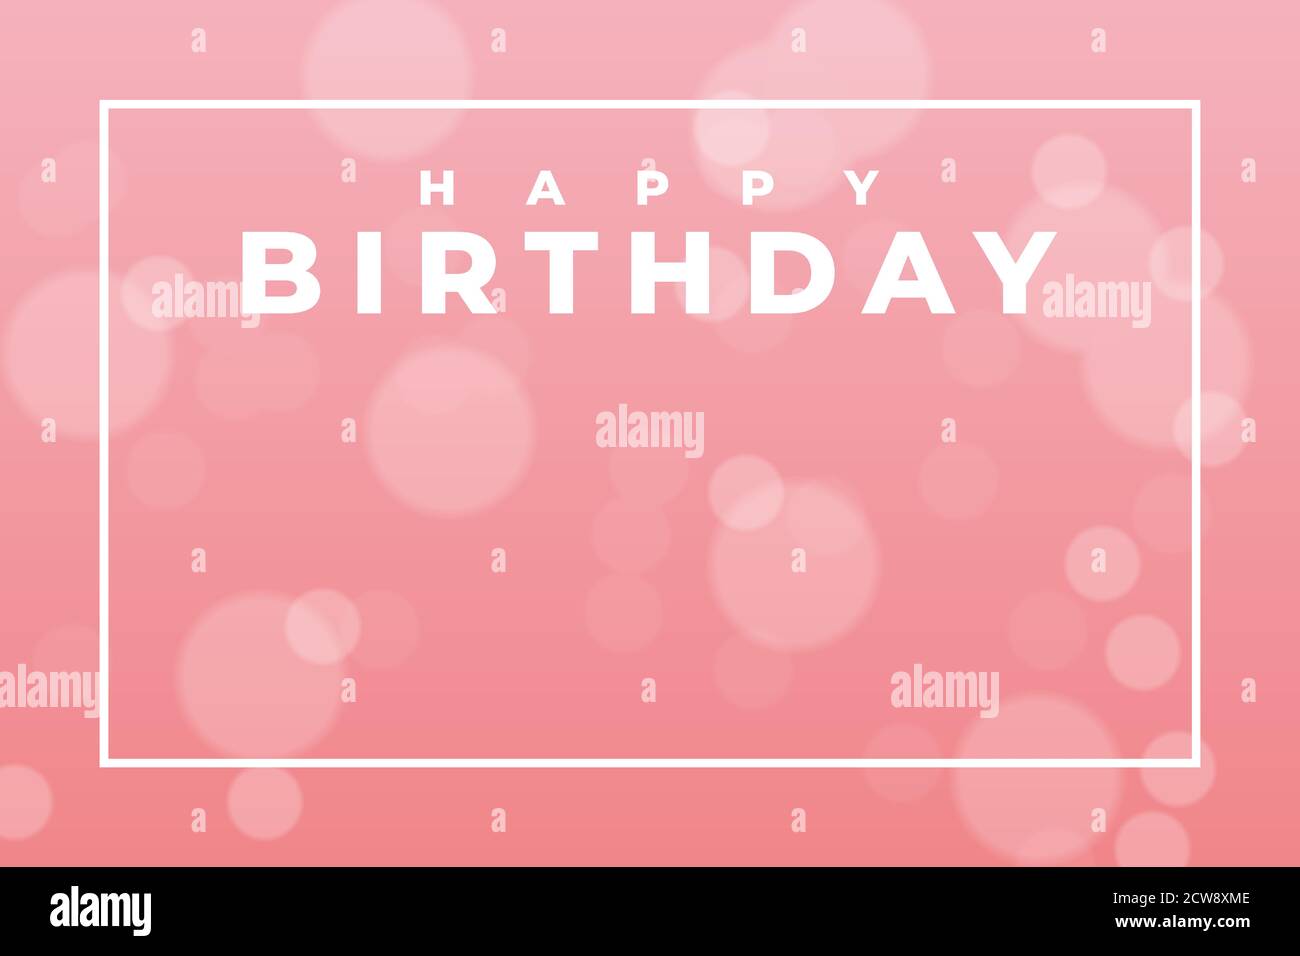 Happy birthday banner. Birthday party background design with confetti on blurry pink background . vector illustration Stock Vector